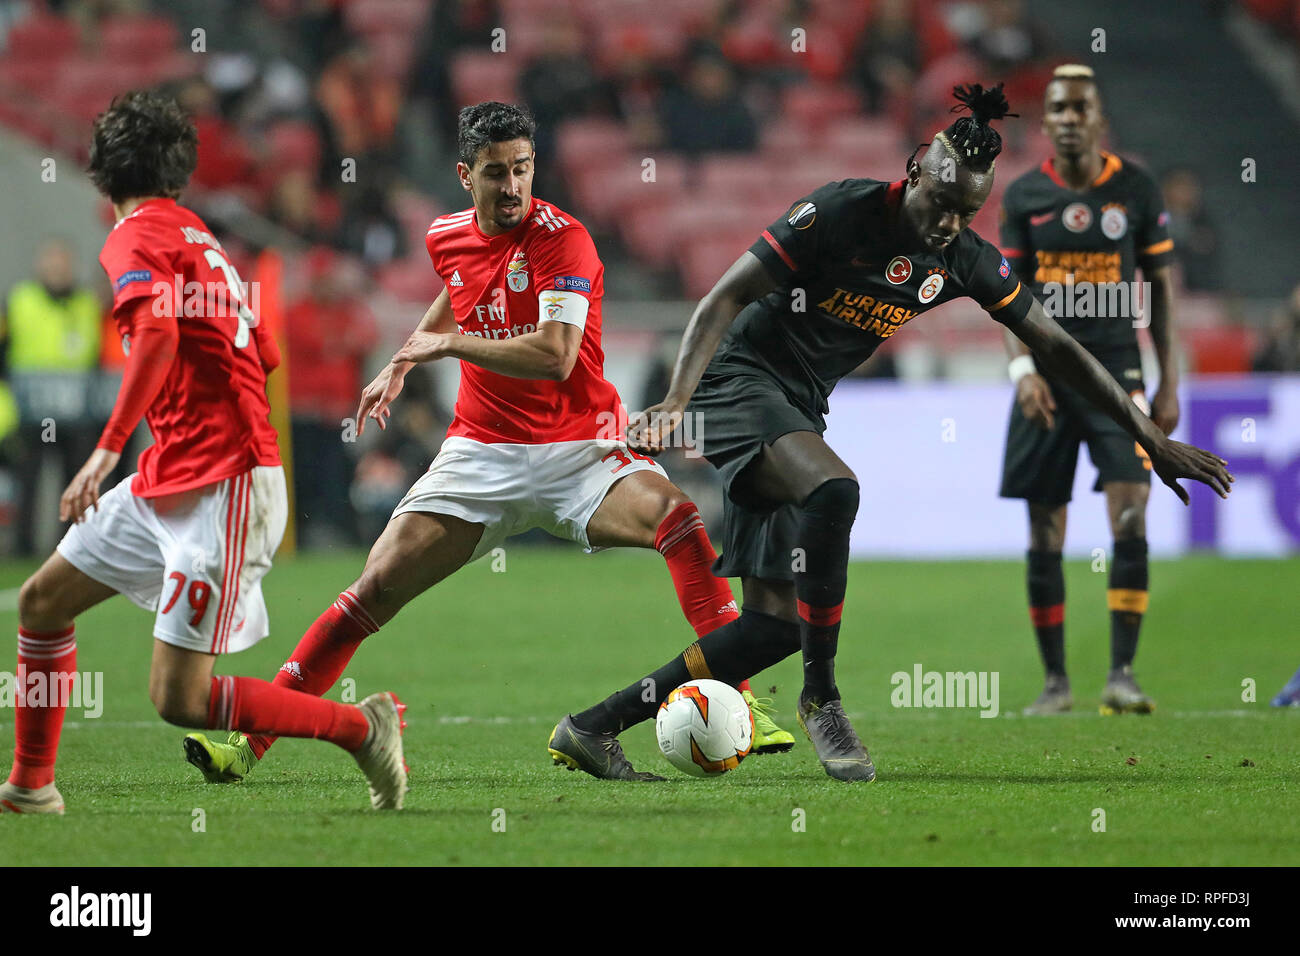 André Almeida of SL Benfica (L) vies for the ball with Mbaye Diagne of Galatasaray AS (R) during the Europa League 2018/2019 footballl match between SL Benfica vs Galatasaray AS.  (Final score: SL Benfica 0 - 0 Galatasaray AS) Stock Photo